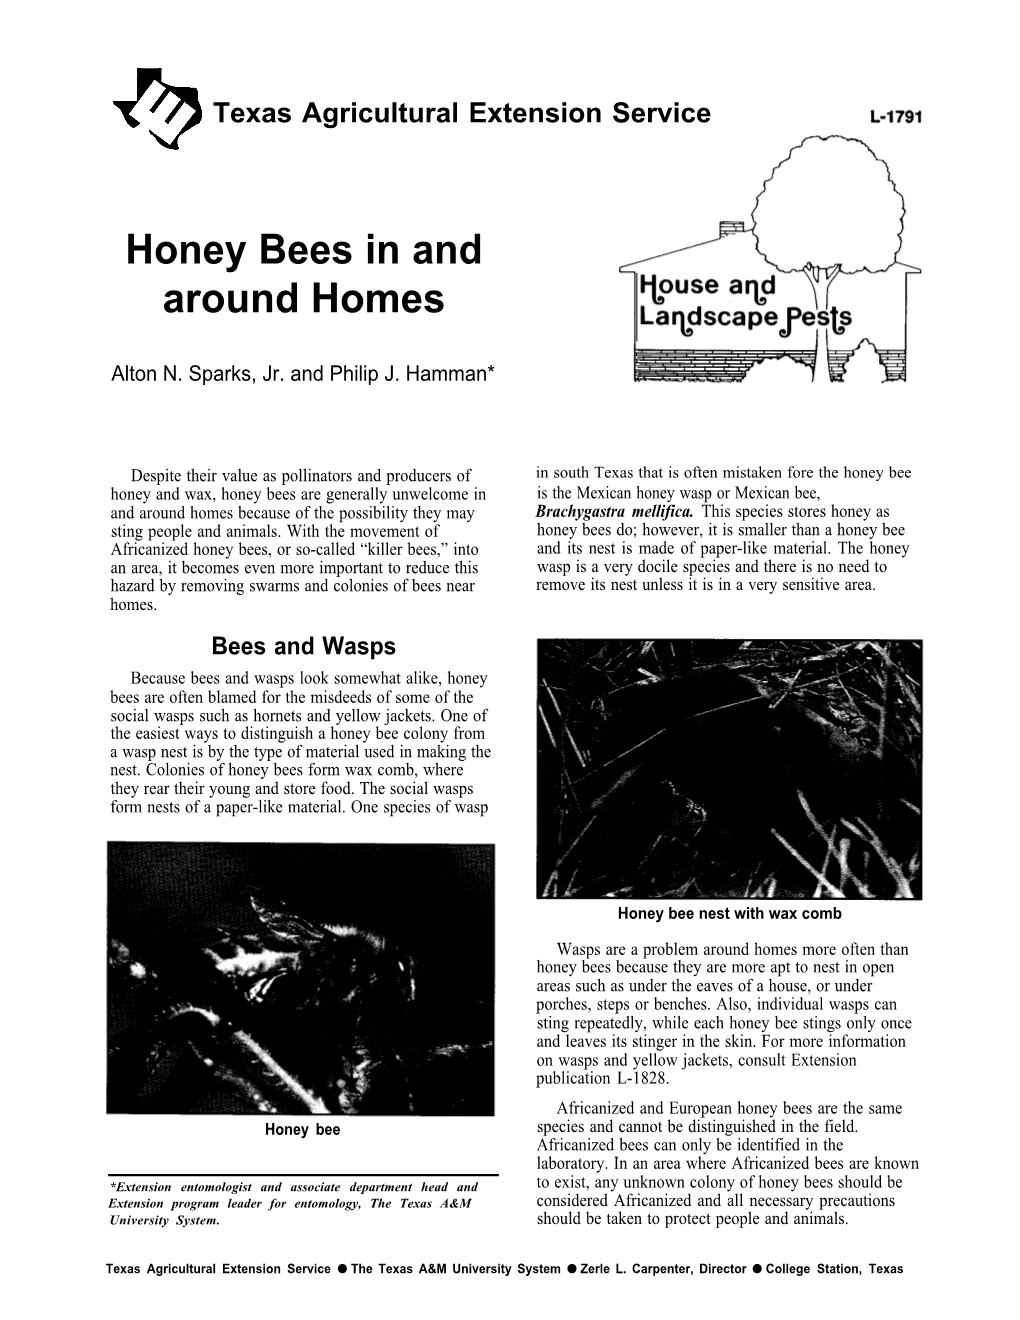 Honey Bees in and Around Homes